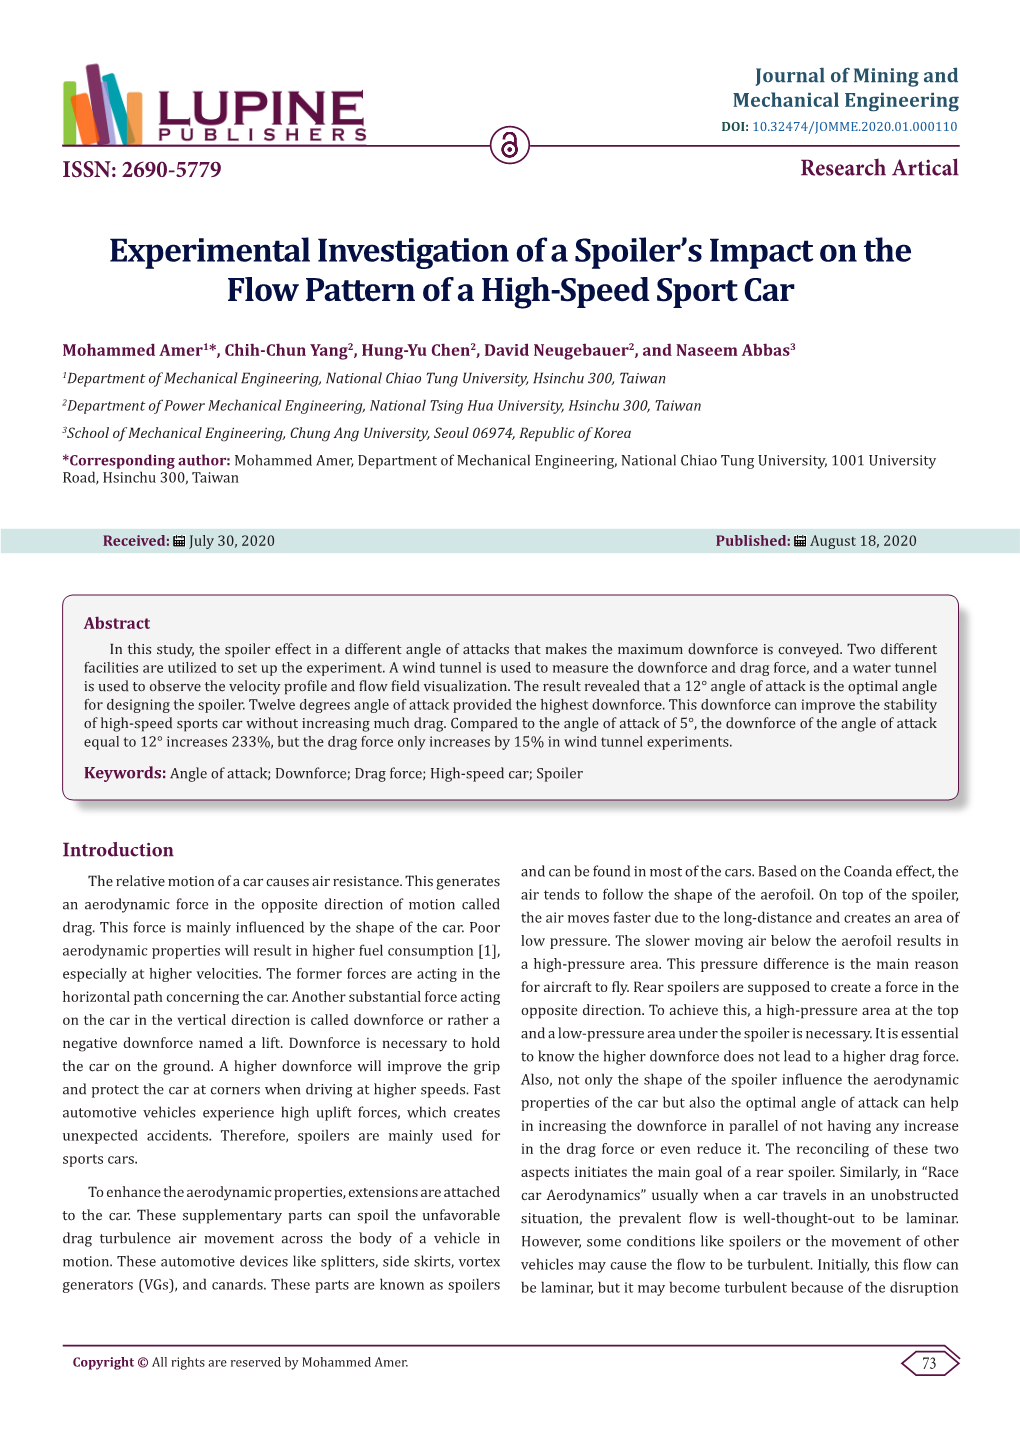 Experimental Investigation of a Spoiler's Impact on the Flow Pattern